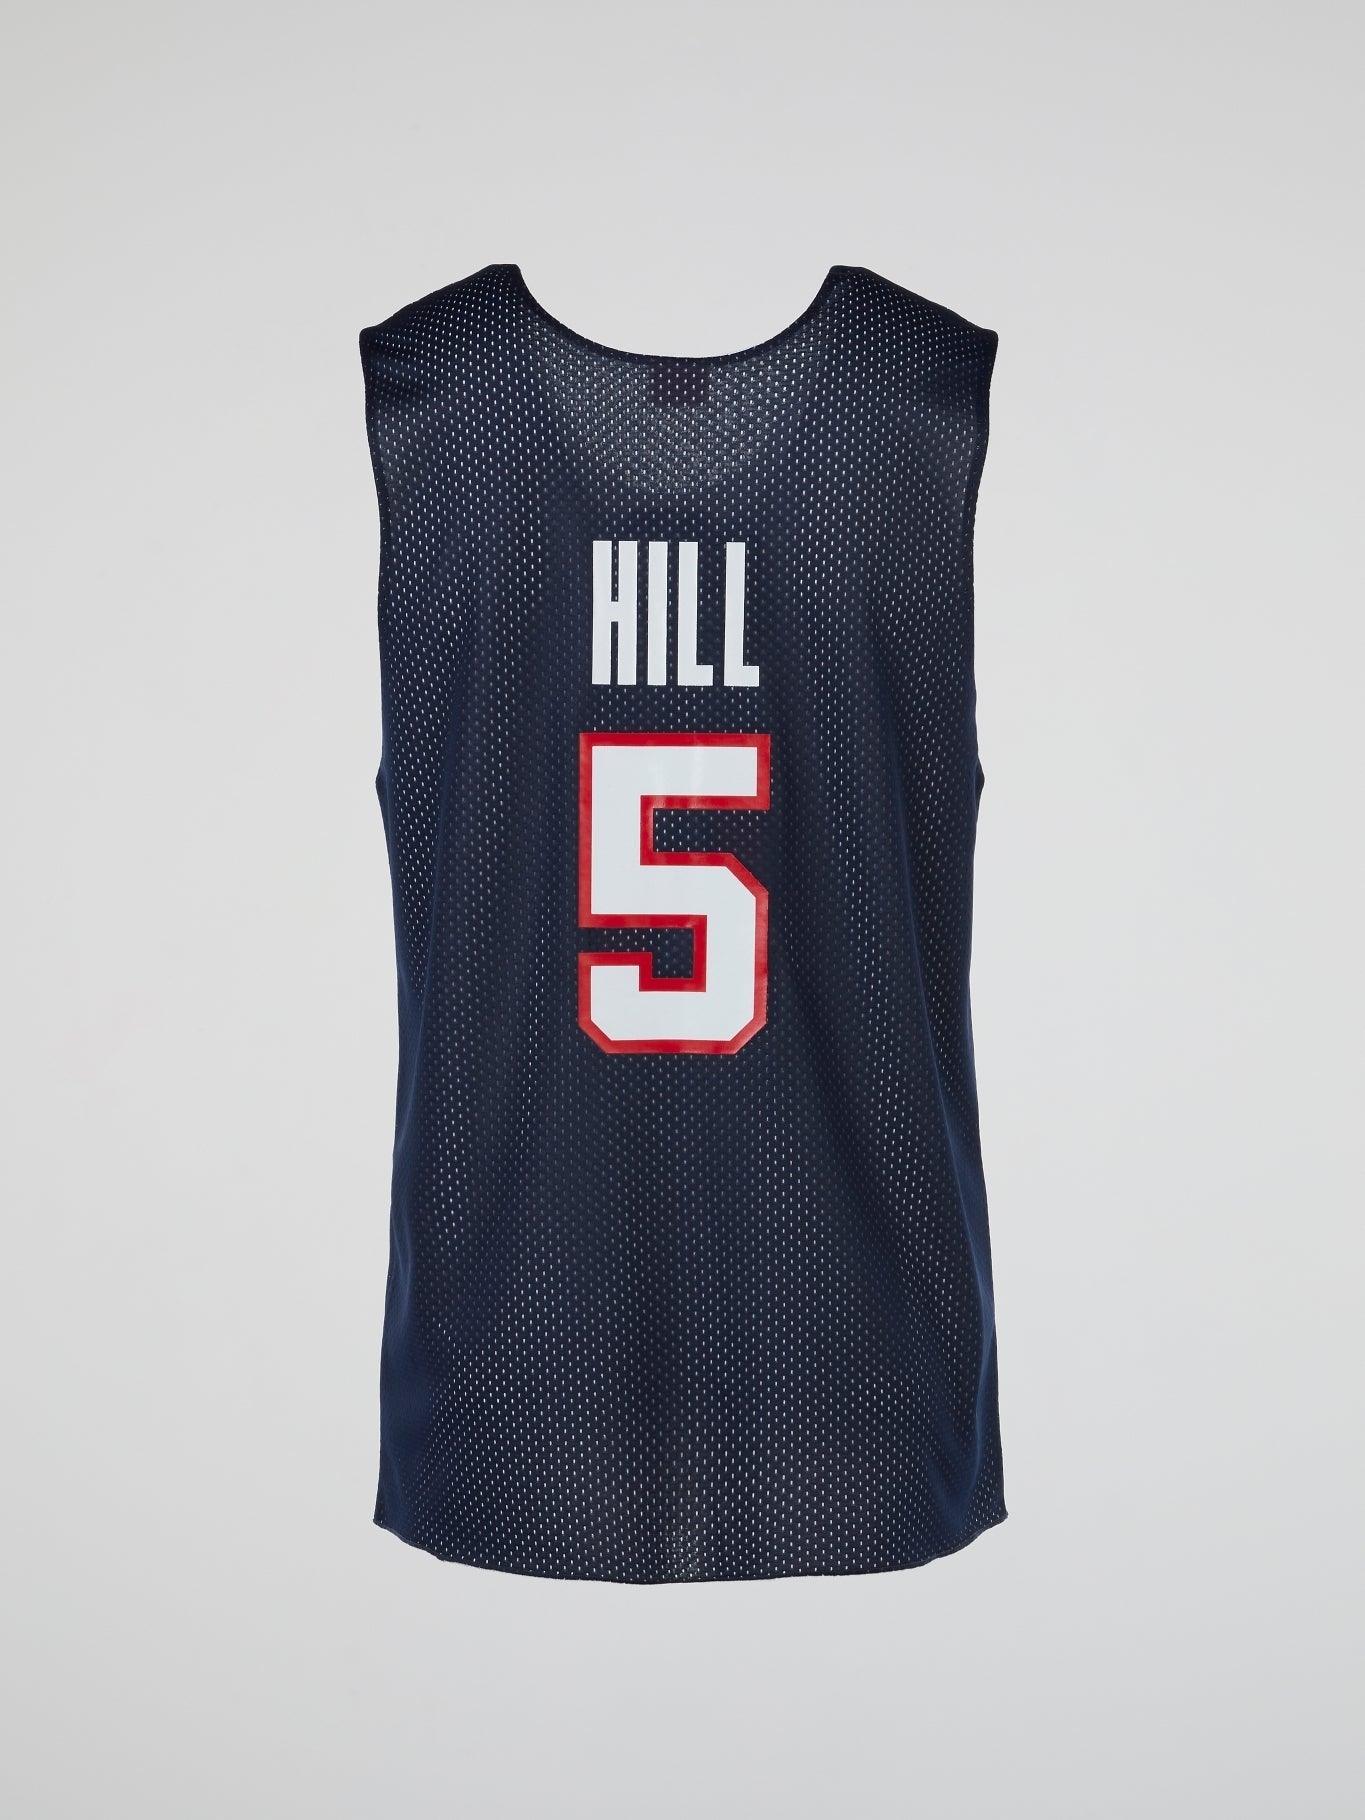 NBA USA 96 Grant Hill Authentic Jersey - B-Hype Society